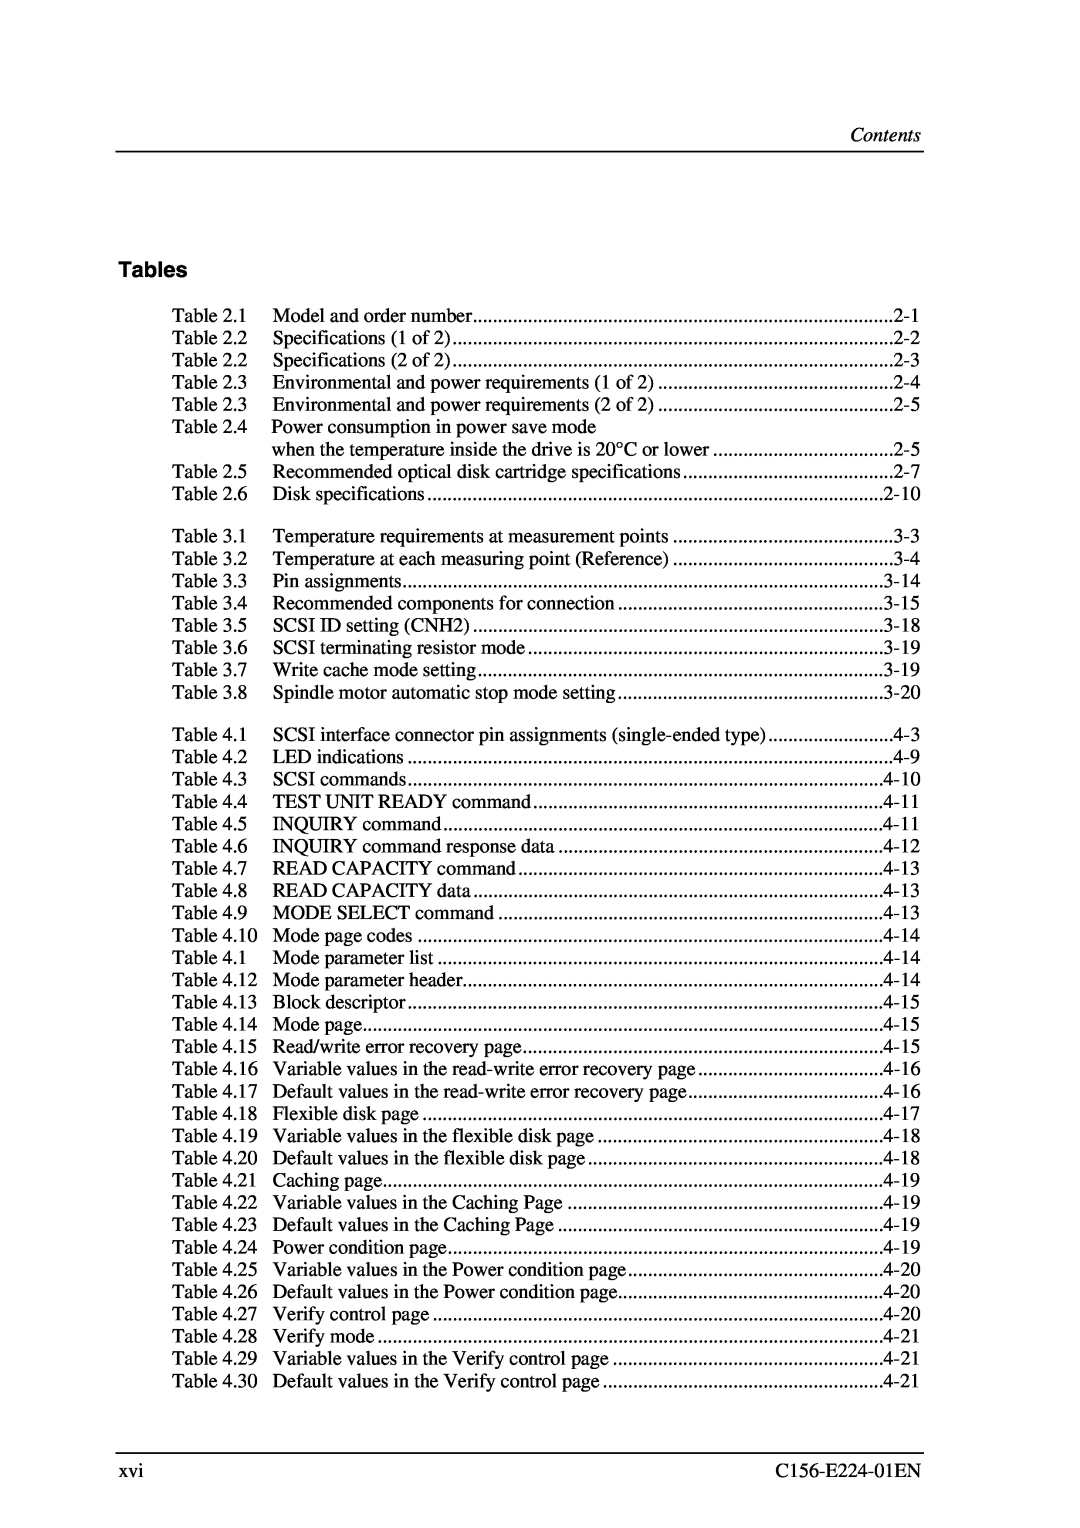 Fujitsu MCJ3230SS manual Tables, Variable values in the read-write error recovery page 